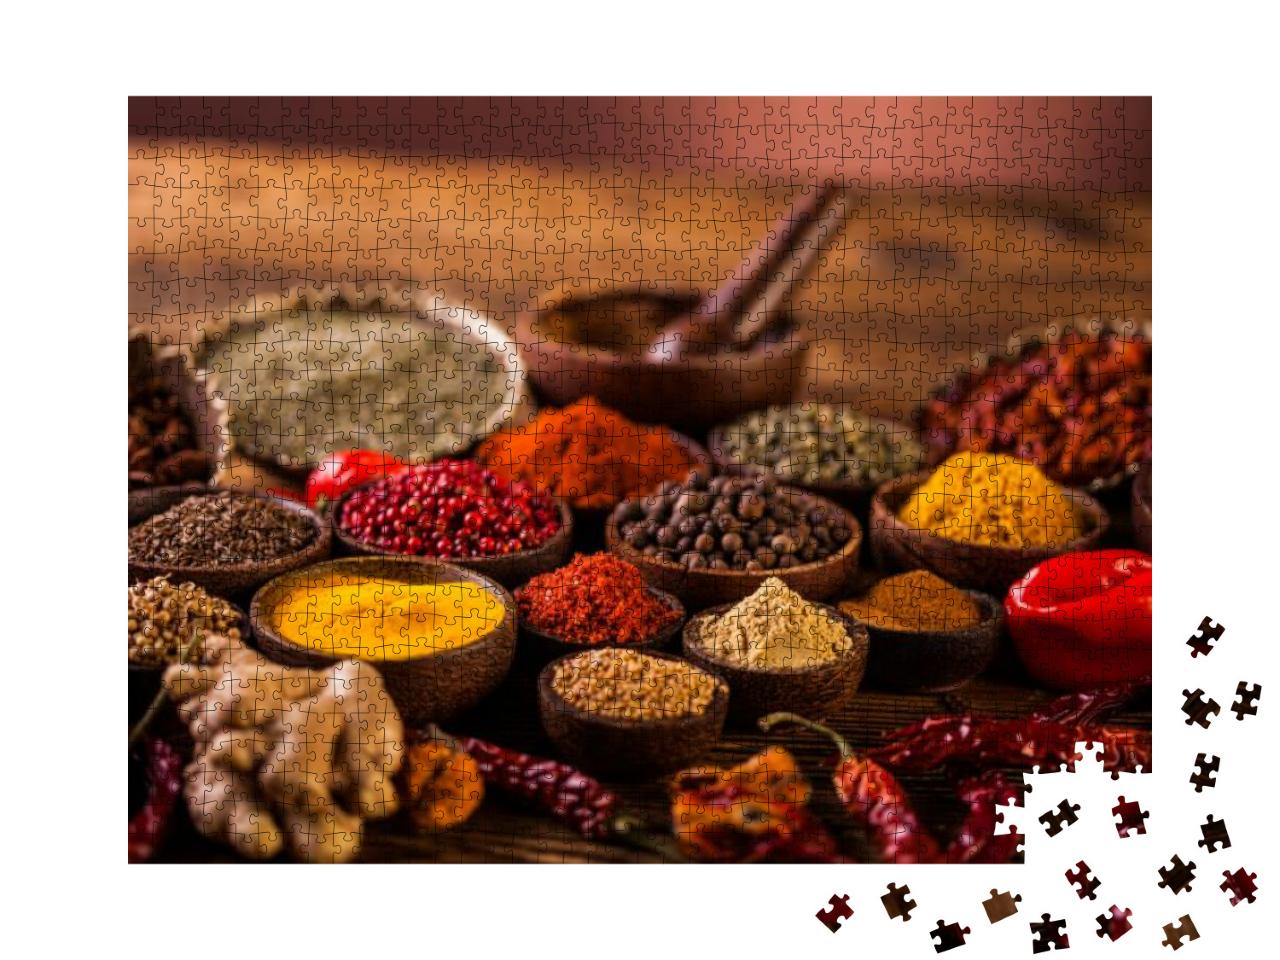 Wooden Table of Colorful Spices... Jigsaw Puzzle with 1000 pieces